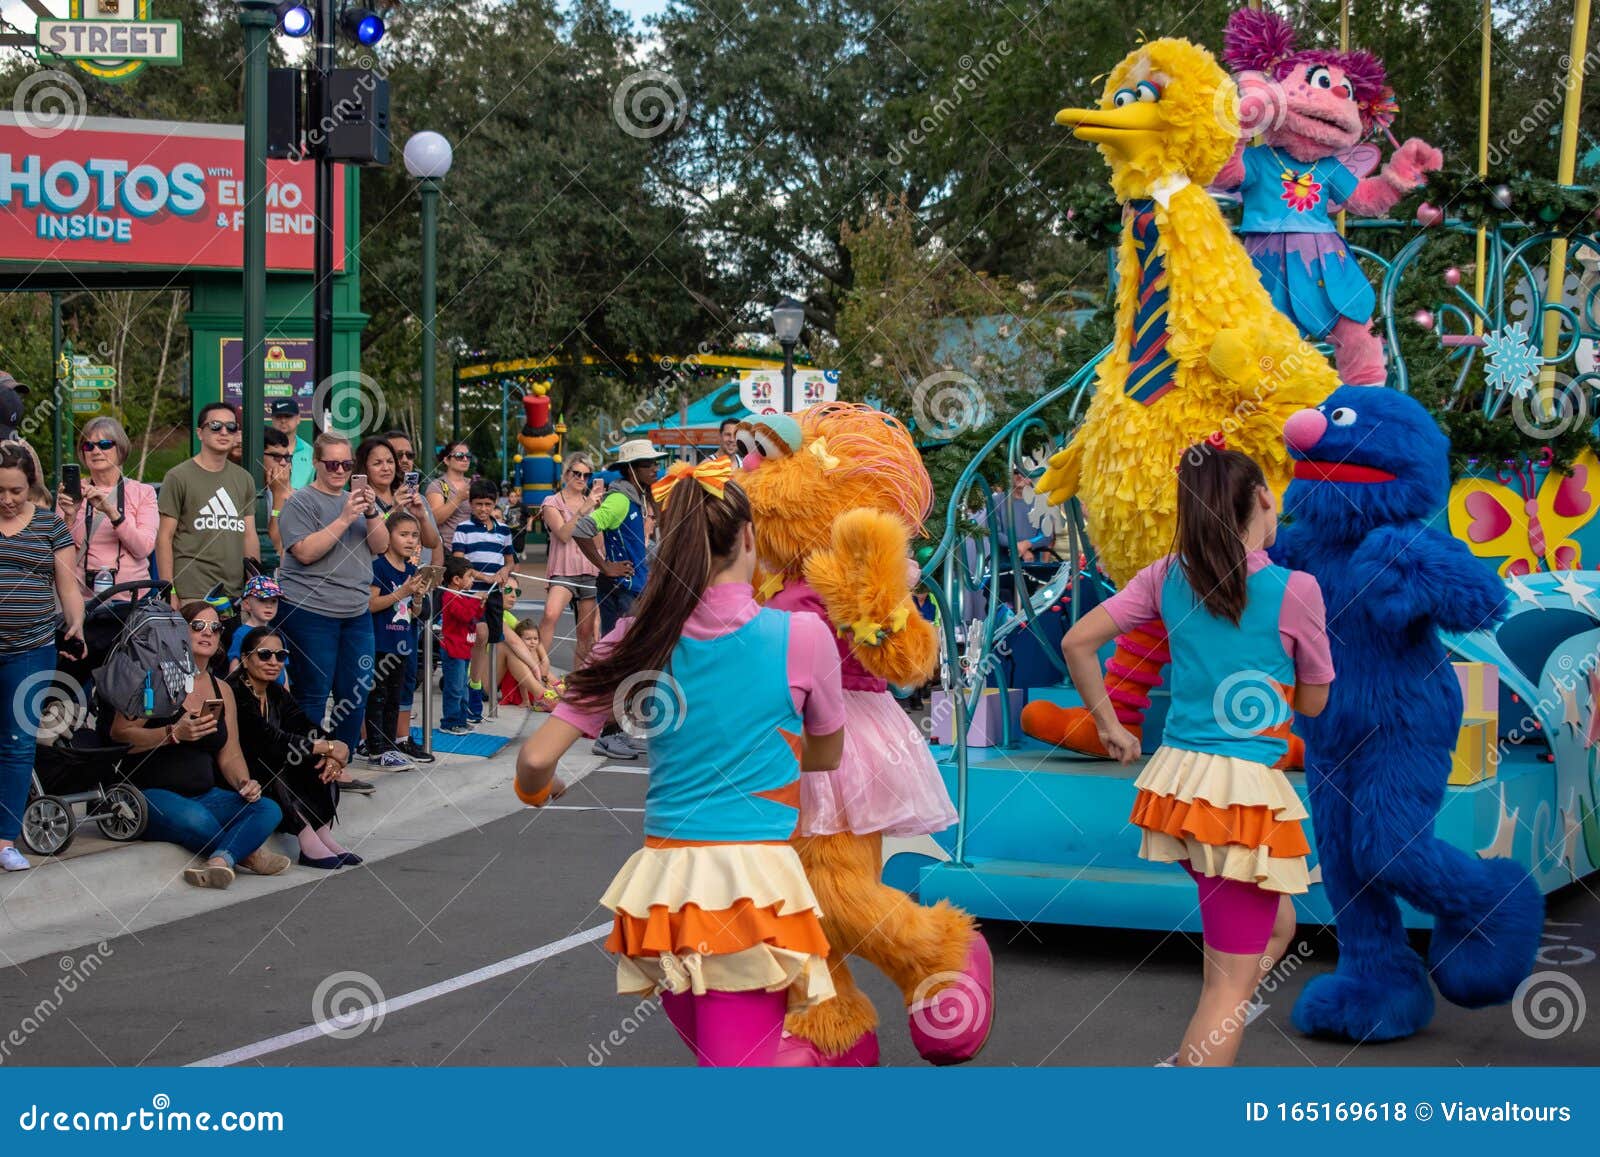 Rosita, Grover and Big Bird with Dancers in Sesame Steet Party Parade ...